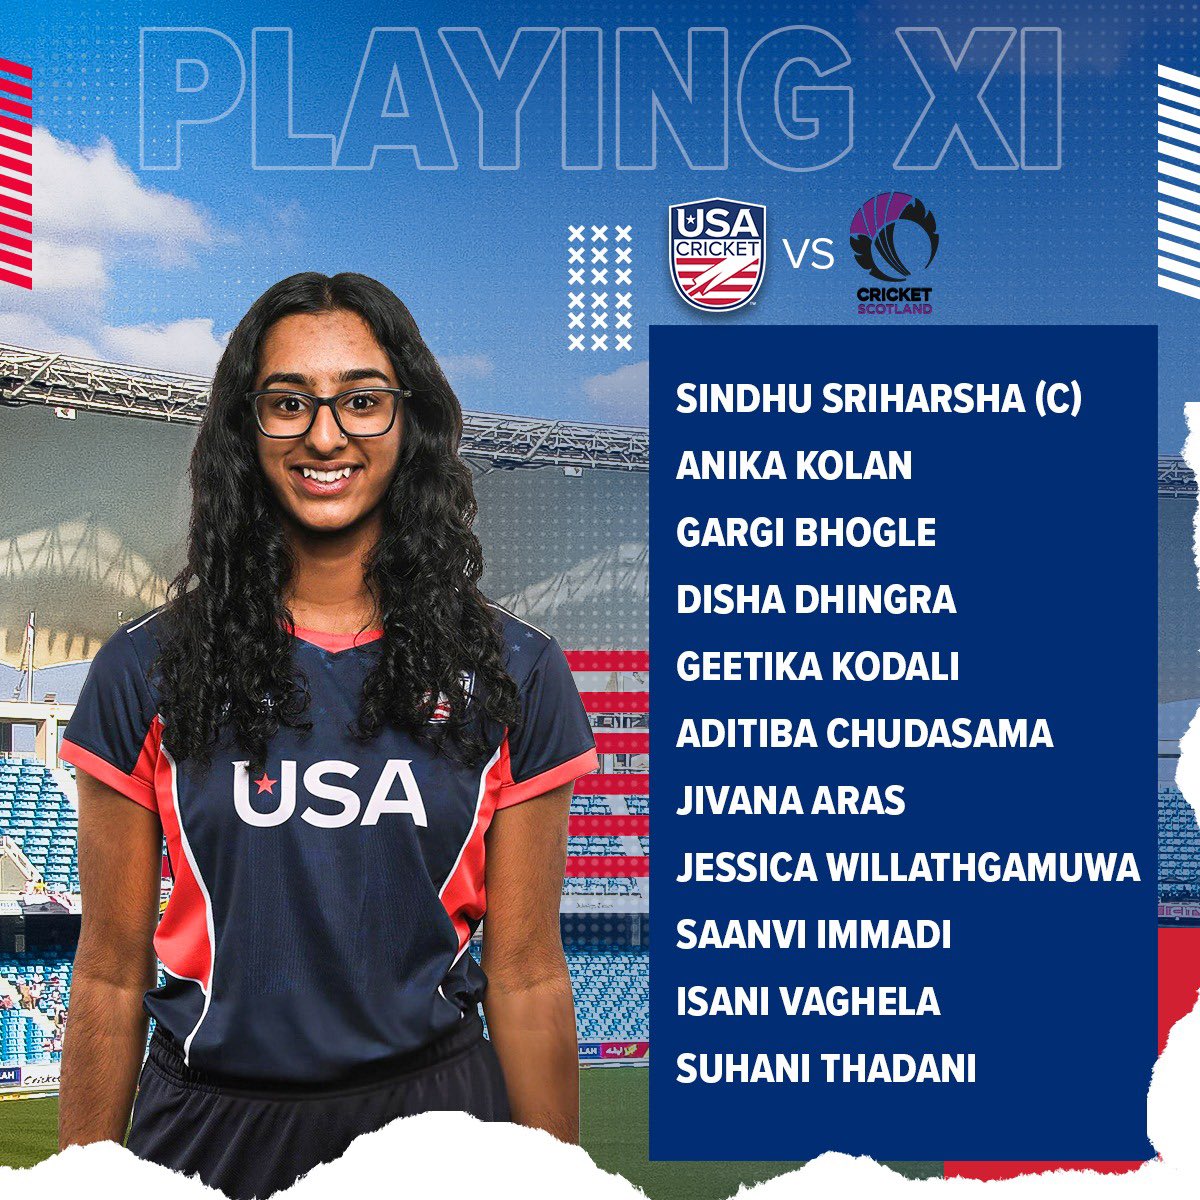 Our Playing XI for the second T20I of the @ICC #T20WorldCup Women’s Qualifier against @cricketscotland! 🙌

#TeamUSA won the toss and elected to field first. 

All matches are streamed on 📲: Icc.tv

#WeAreUSACricket 🇺🇸